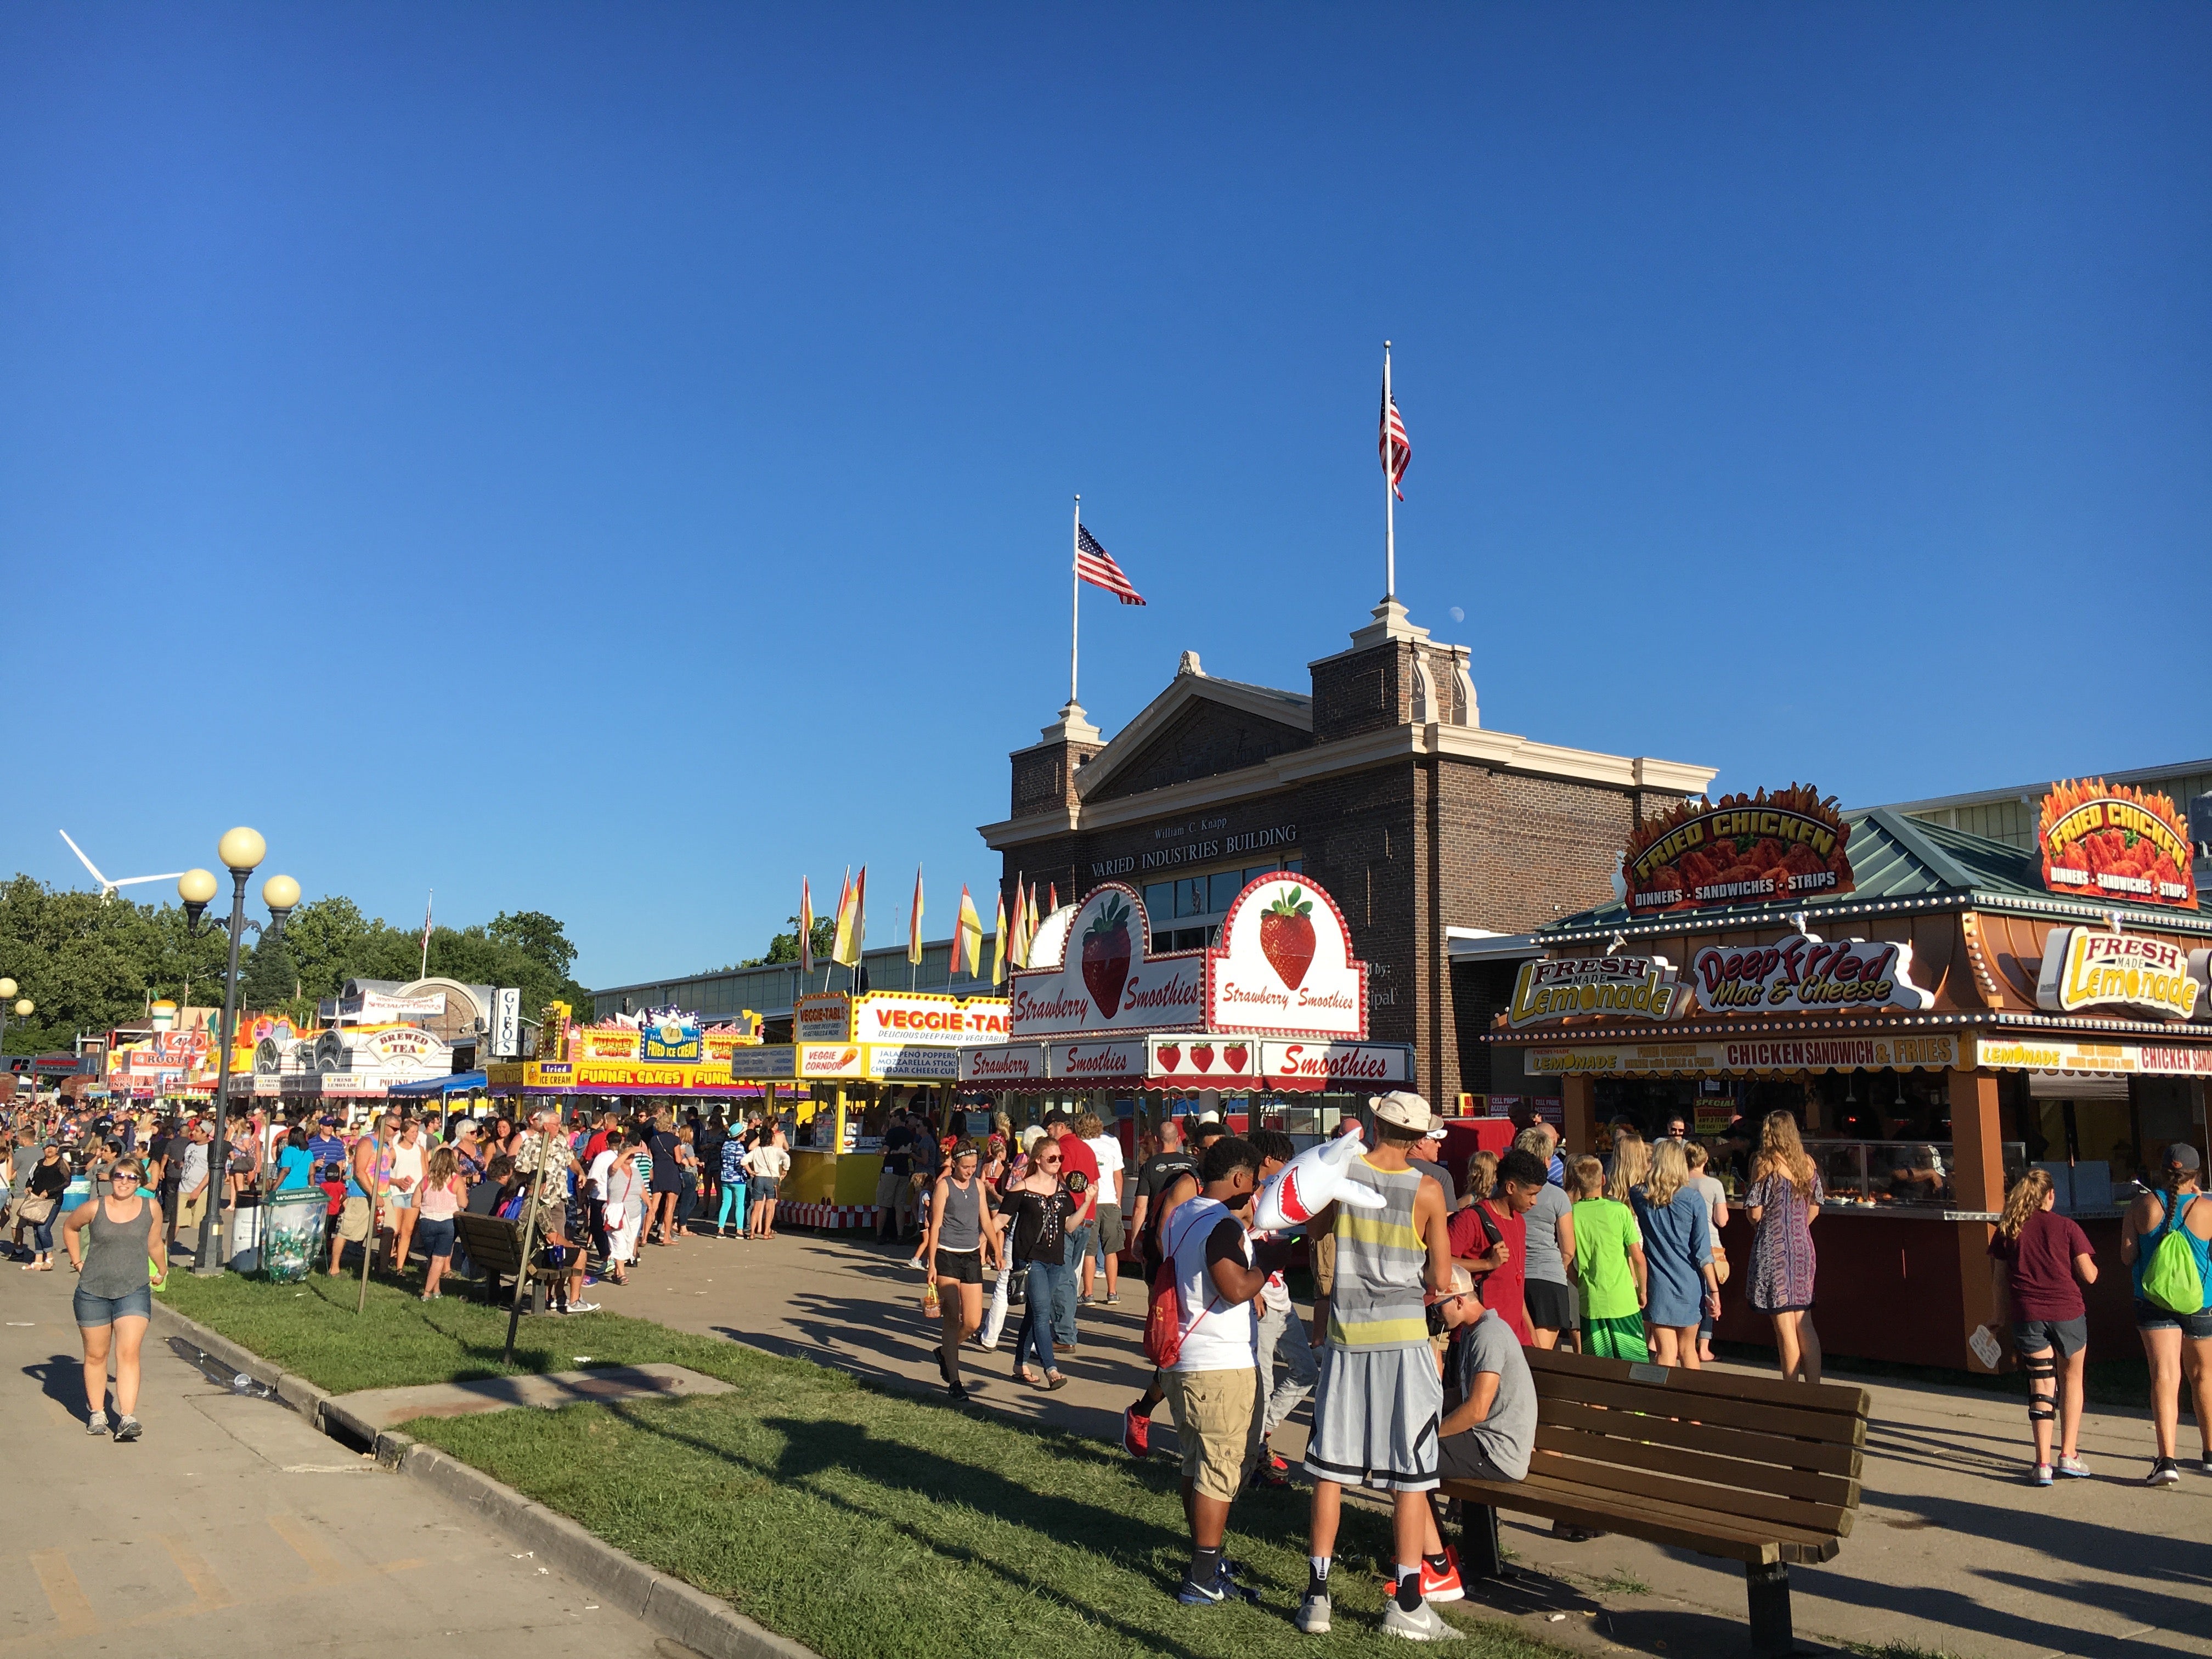 Camper submitted image from Iowa State Fairgrounds - 2